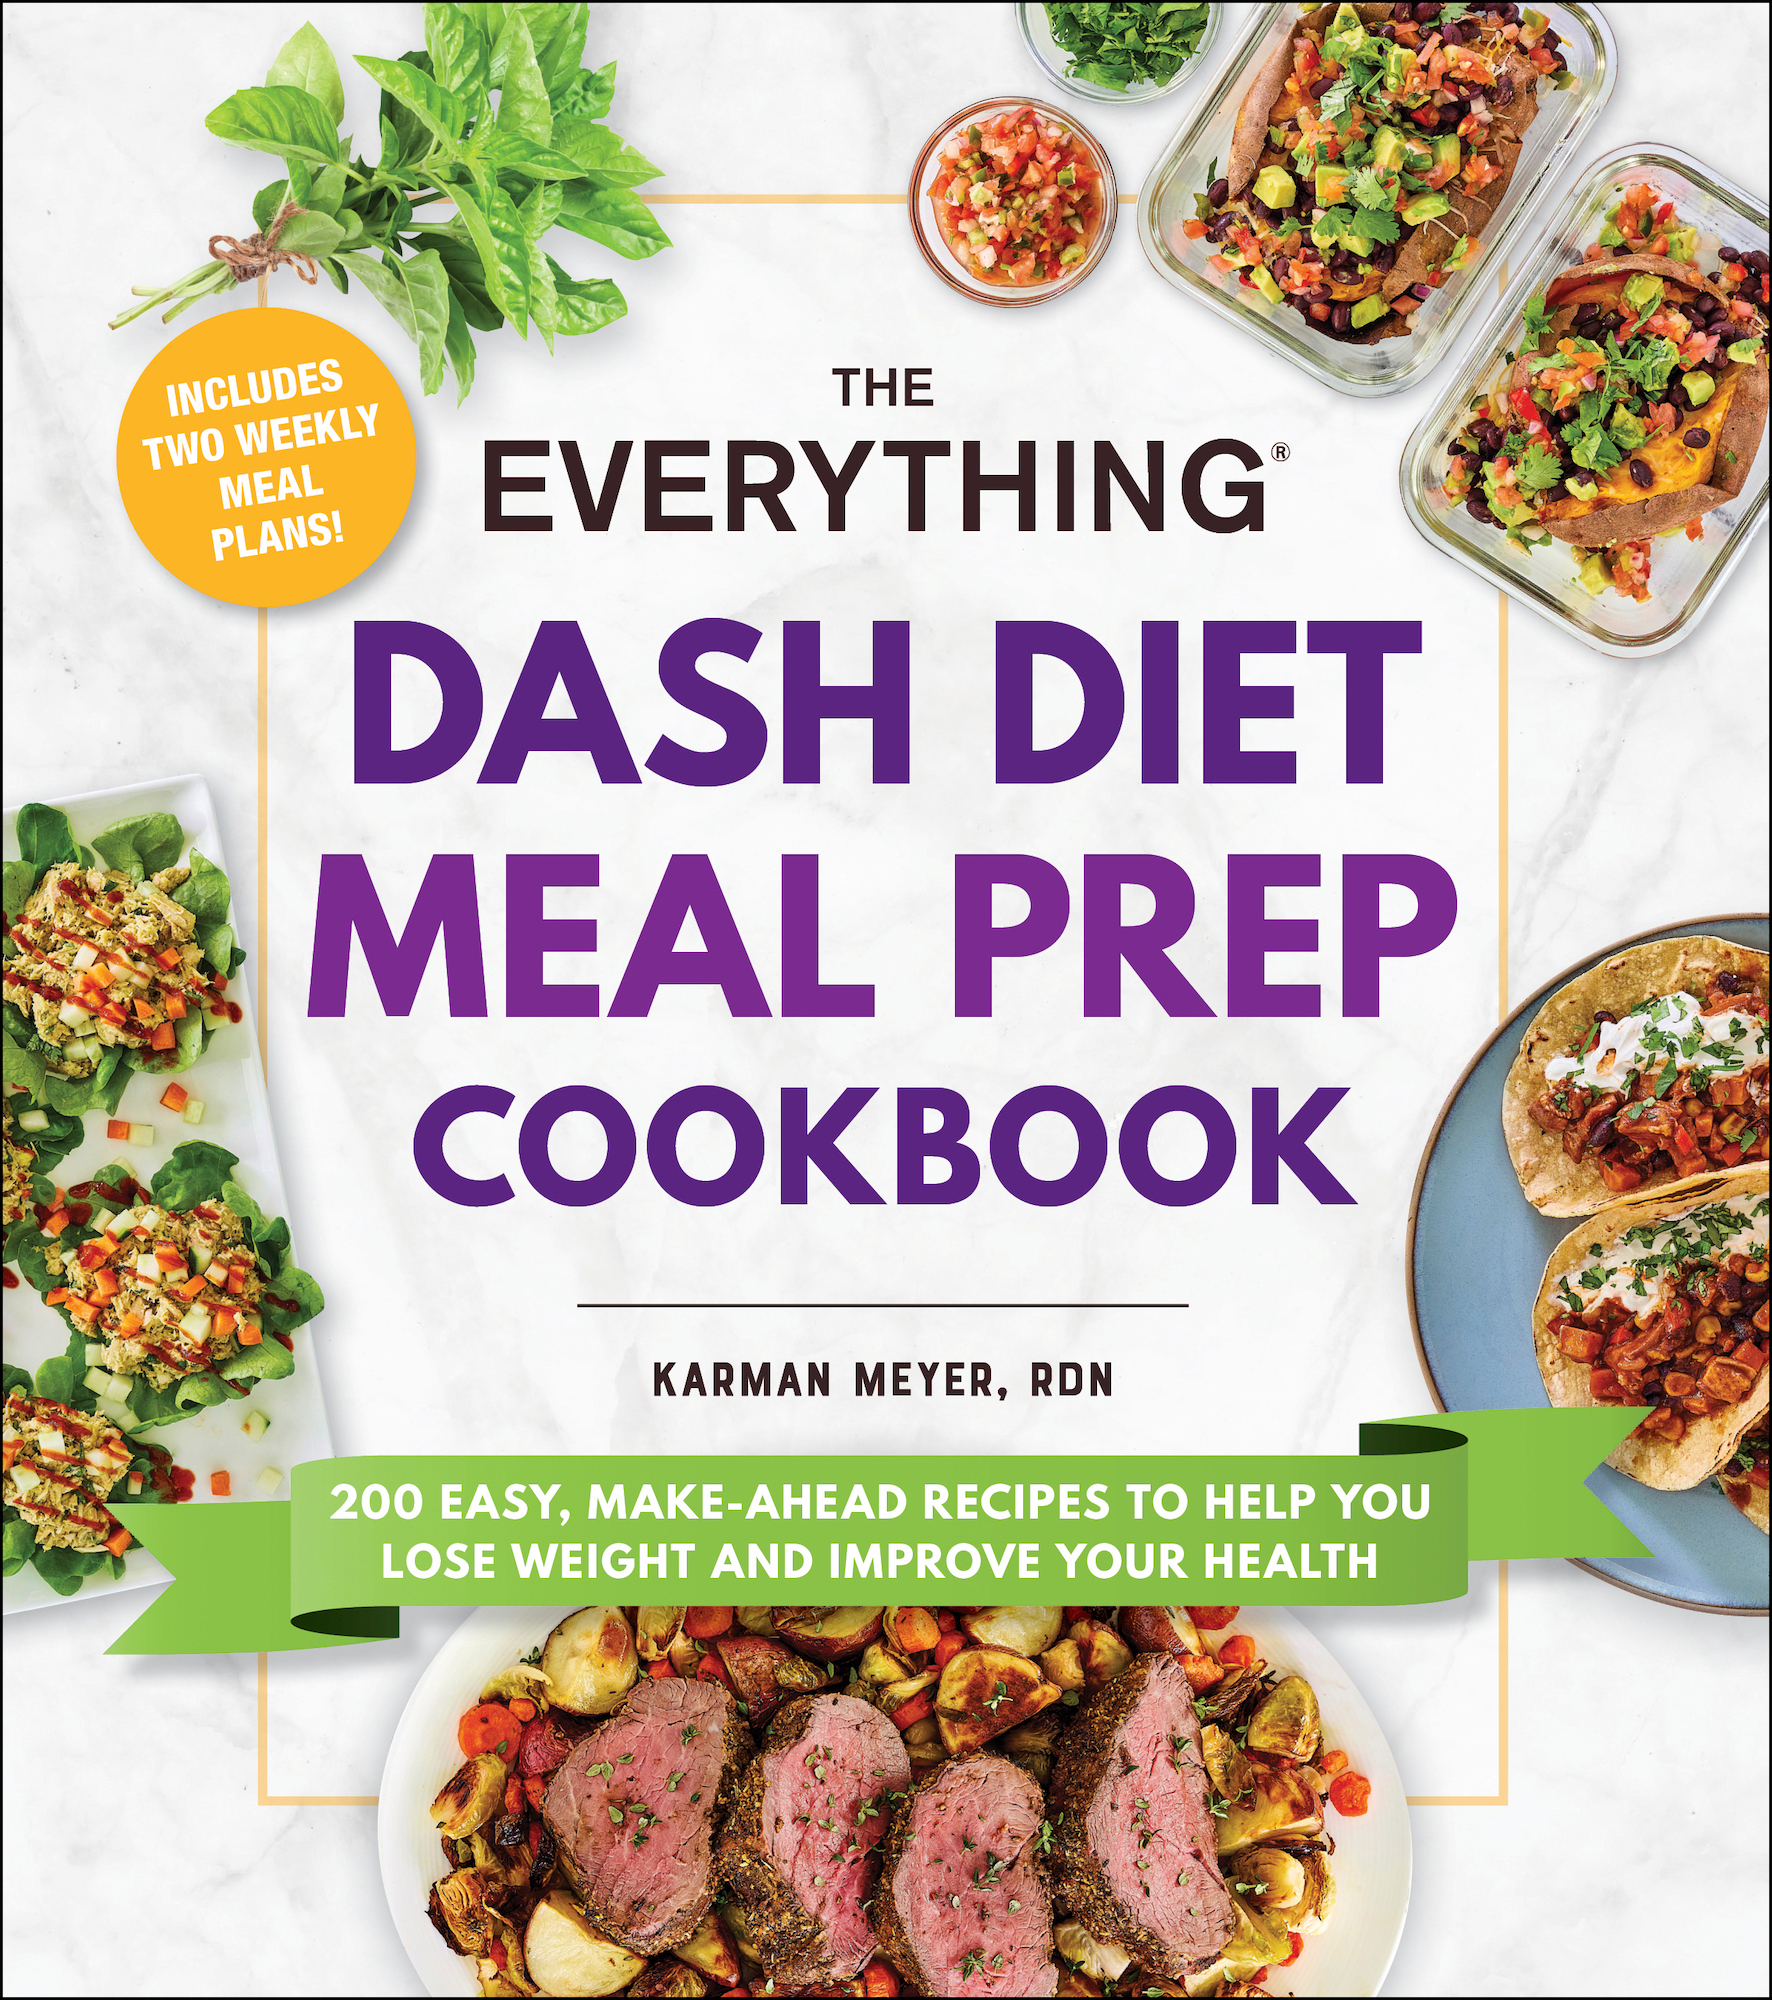 The Everything Dash Diet Meal Prep Cookbook Includes Two Weekly Meal Plans - photo 1